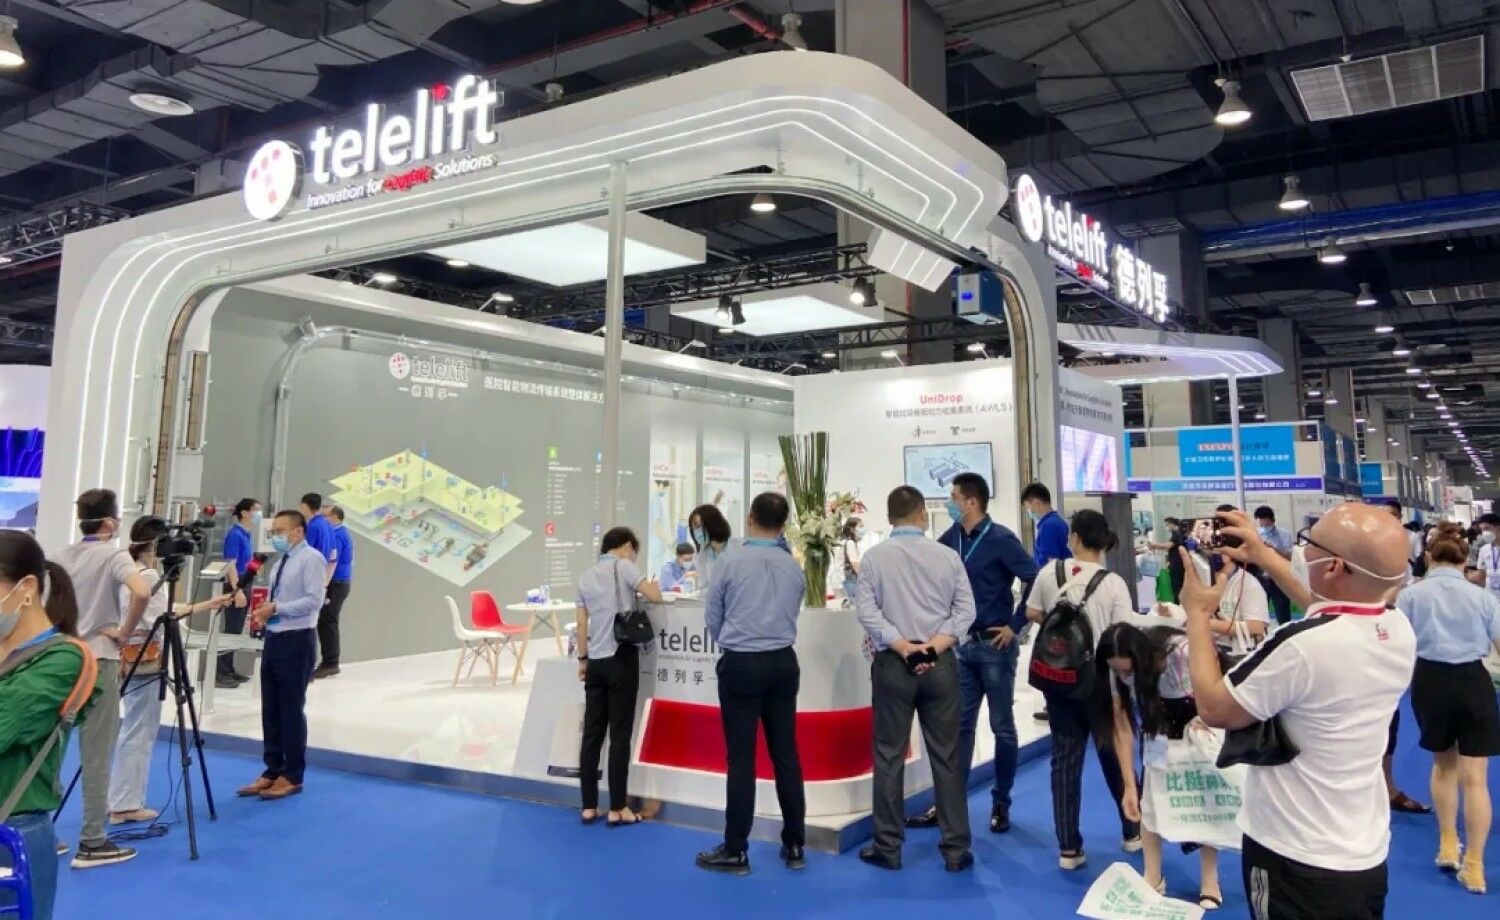 Telelift Messestand